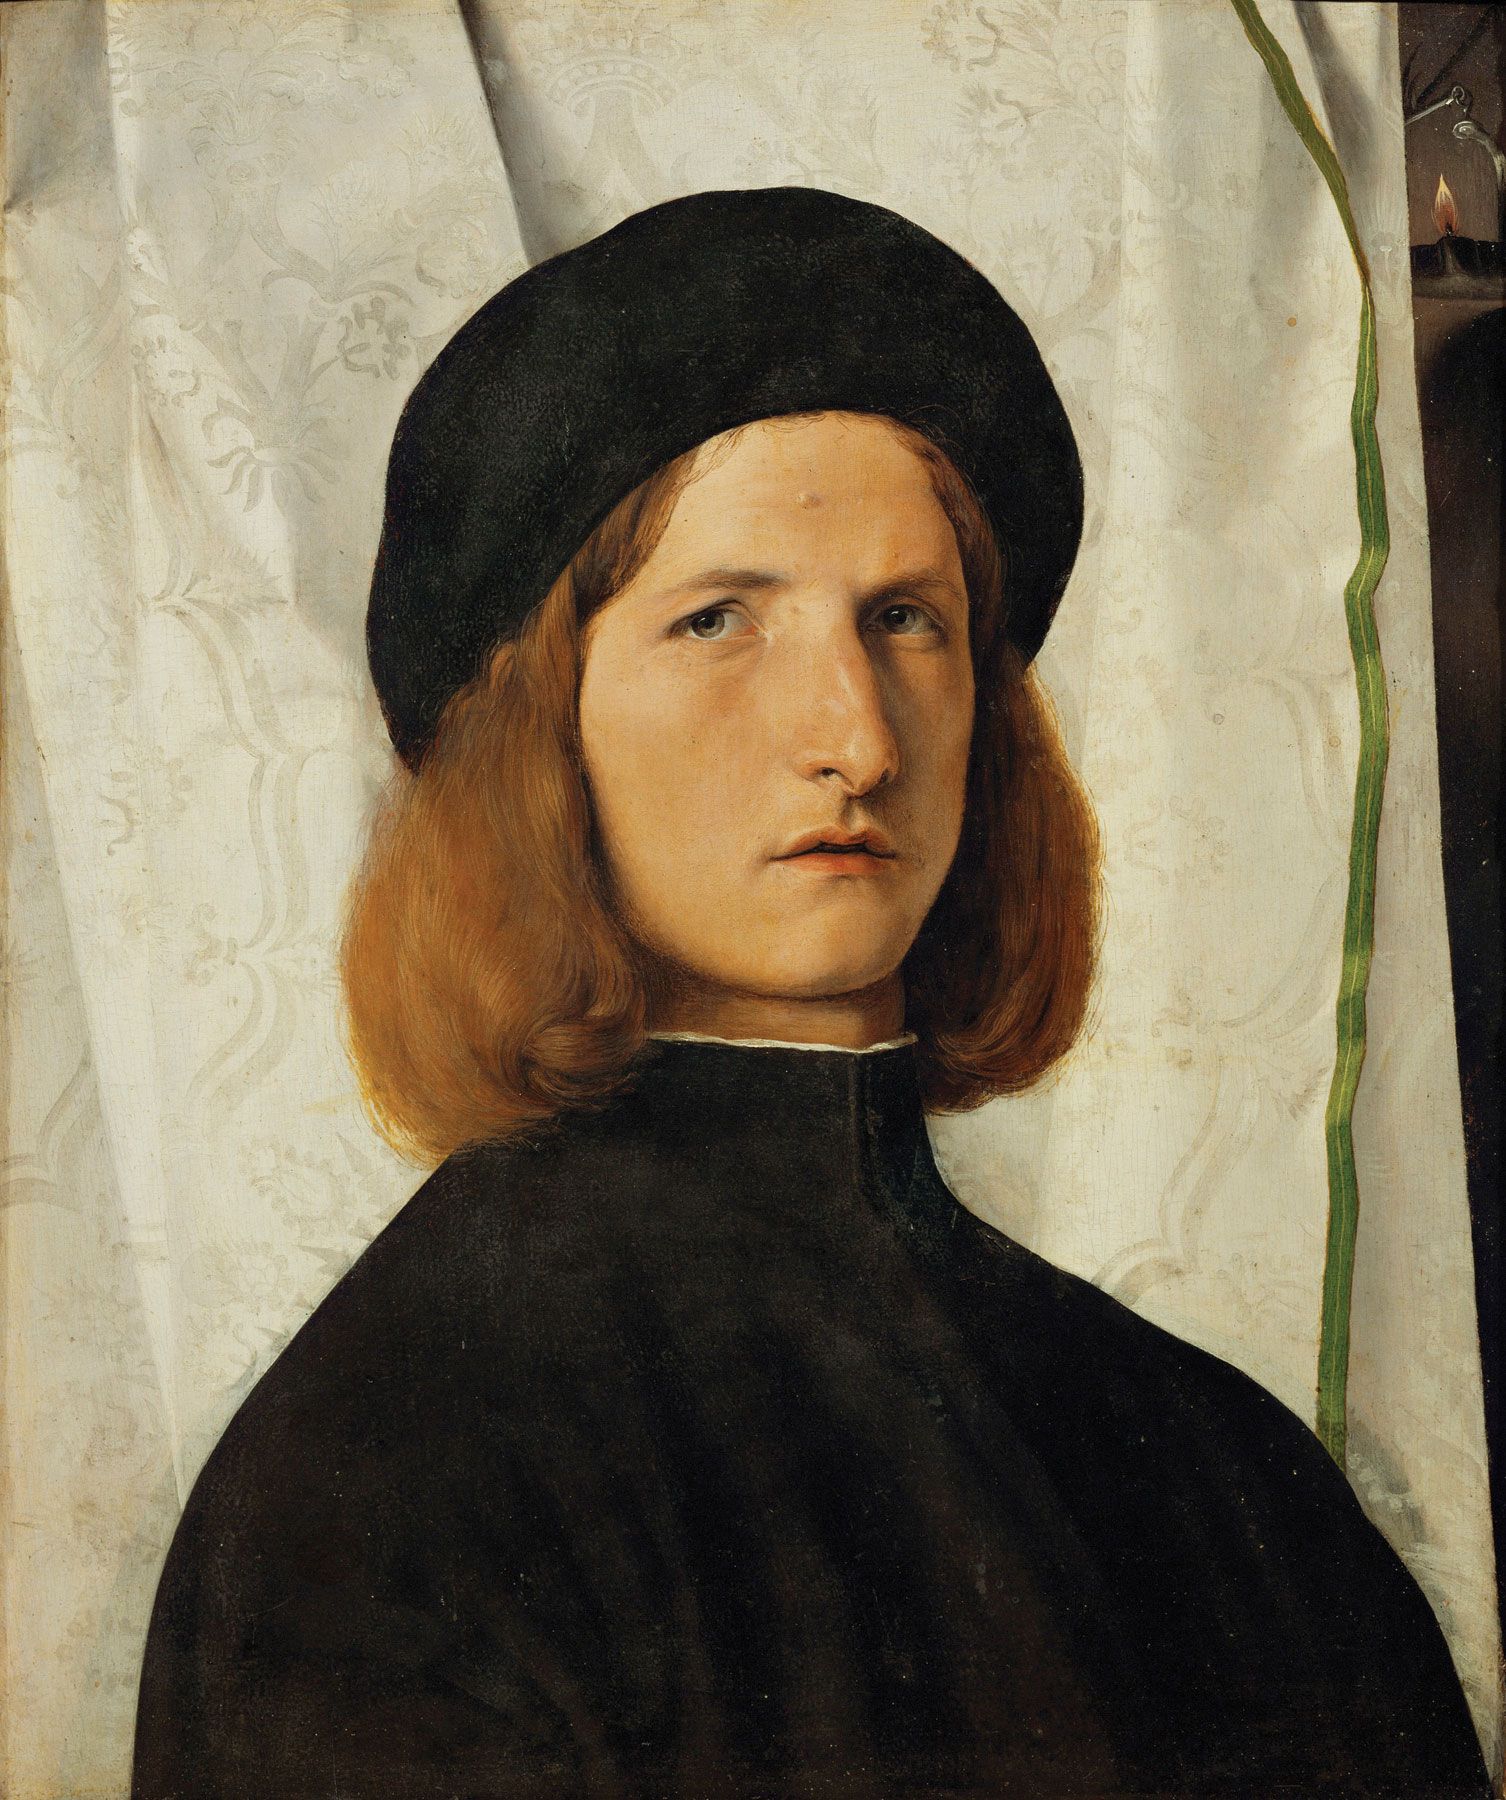 Young Man in Black by Lorenzo Lotto (1508) | History of Portraiture ...